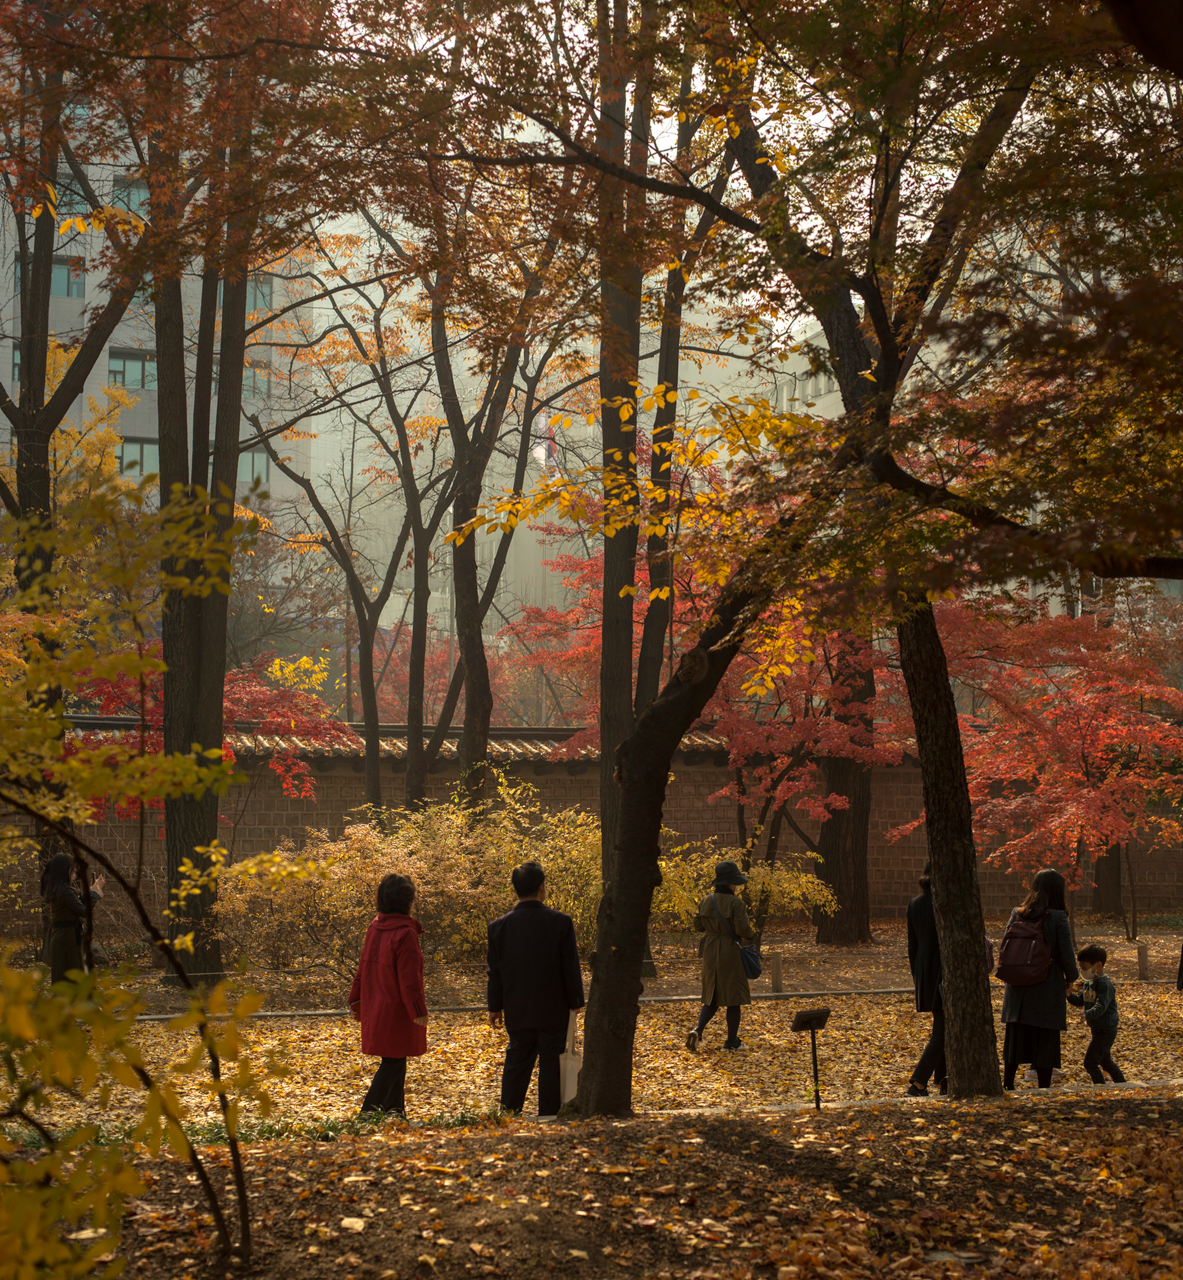 People walking on a leaf-covered path under autumn trees